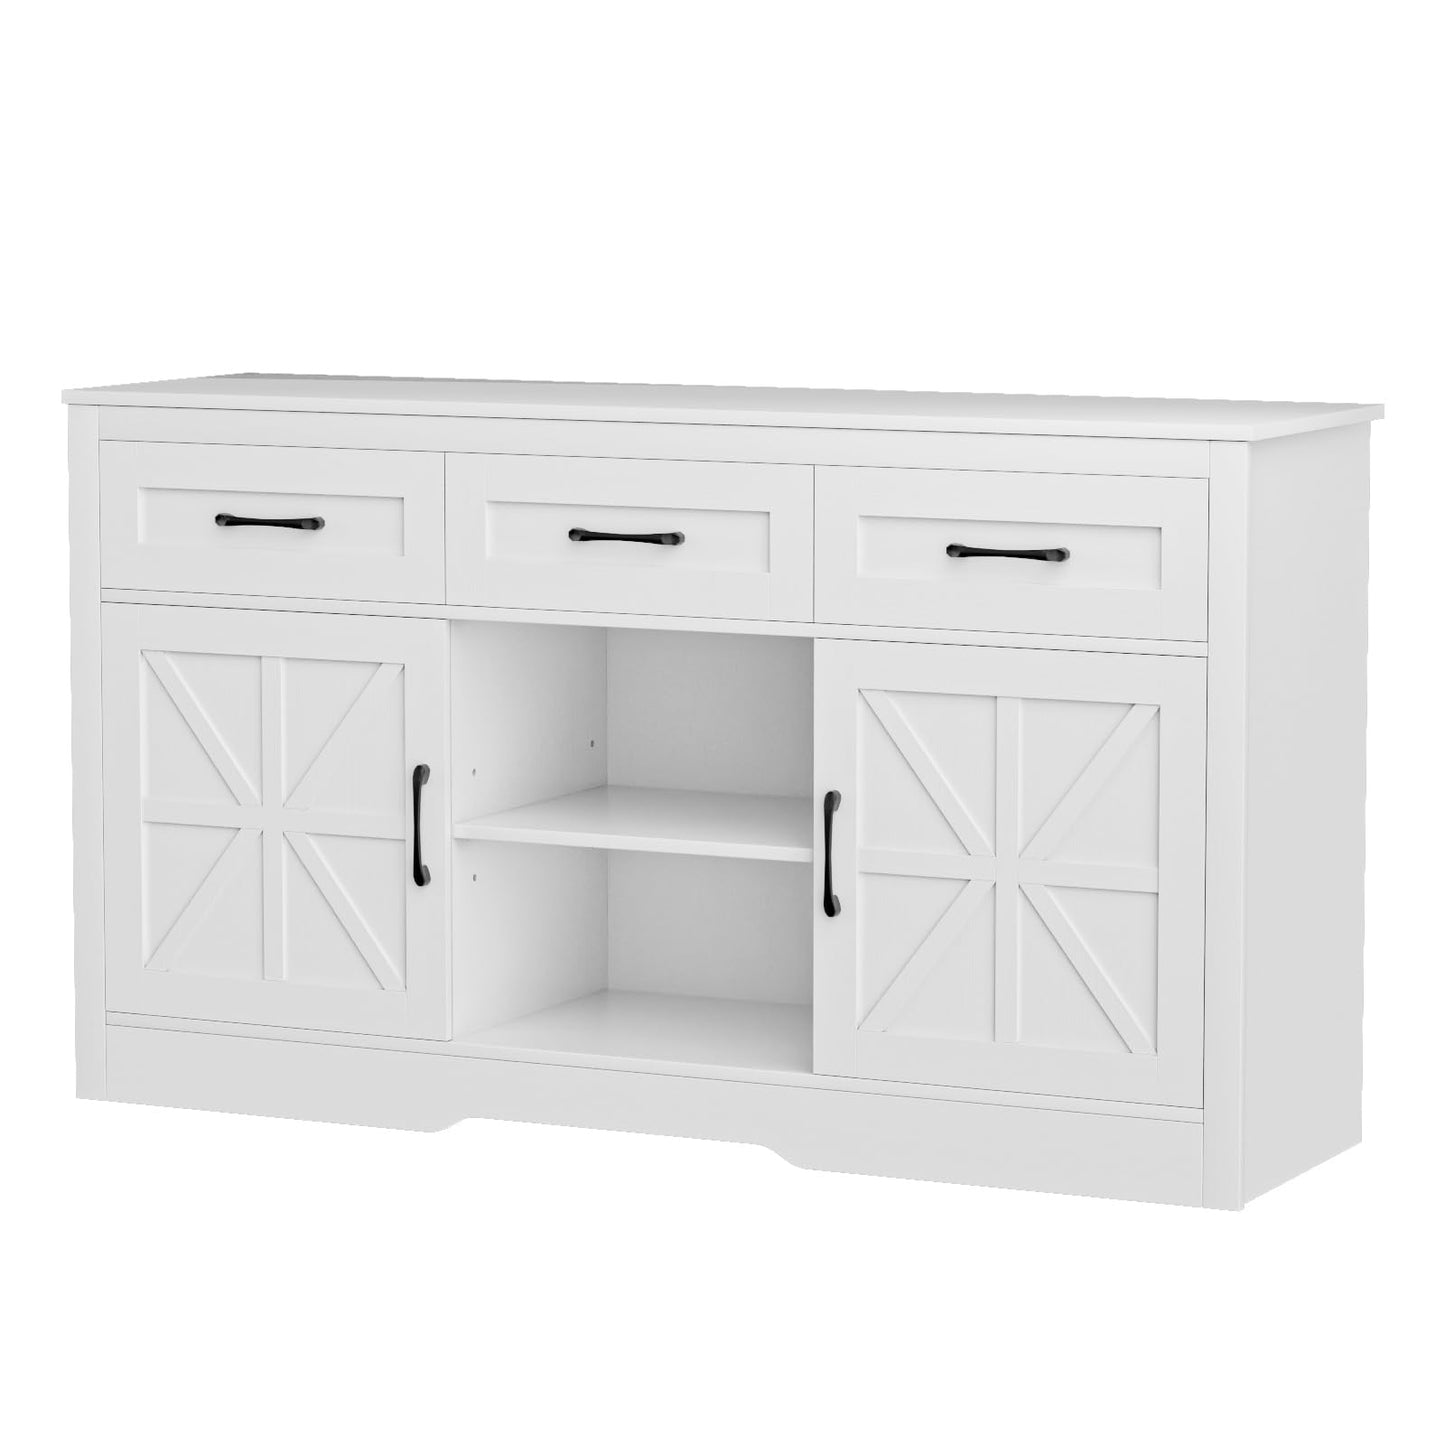 Tradare Sideboard Buffet Cabinet with Storage, Large Kitchen Buffet Cabinet with Doors and Drawers, 55” Farmhouse Entryway Console Cabinet for